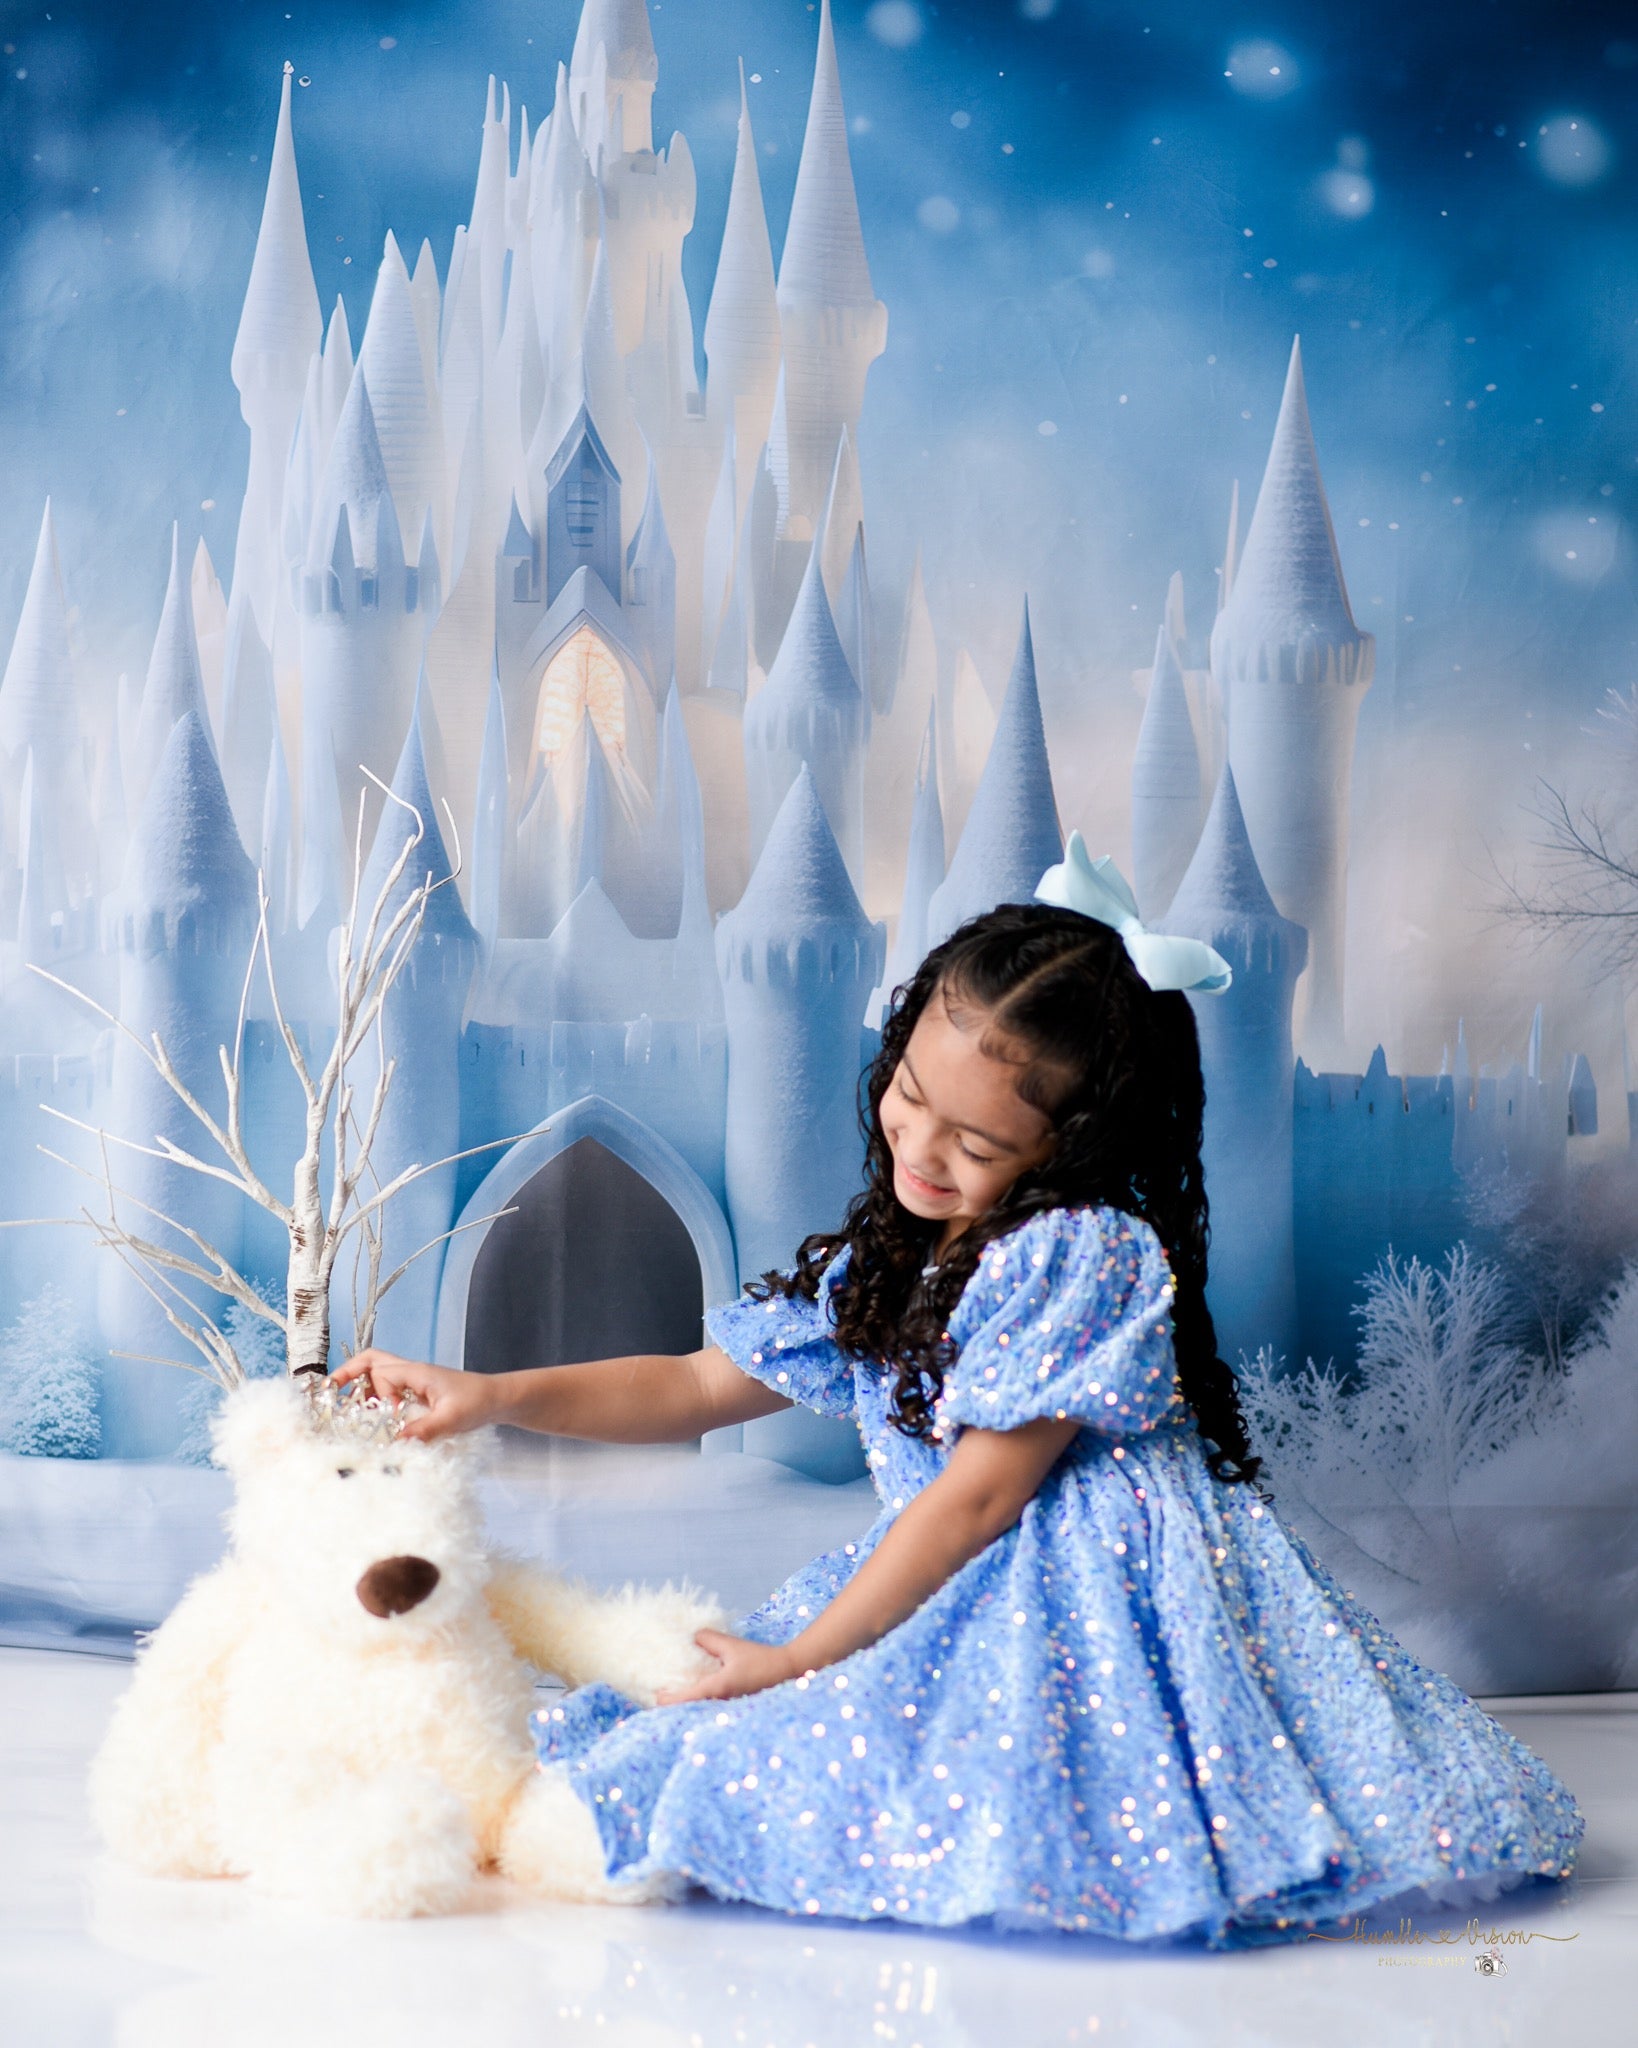 Kate Winter Snowy Frosted Castle Backdrop for Photography